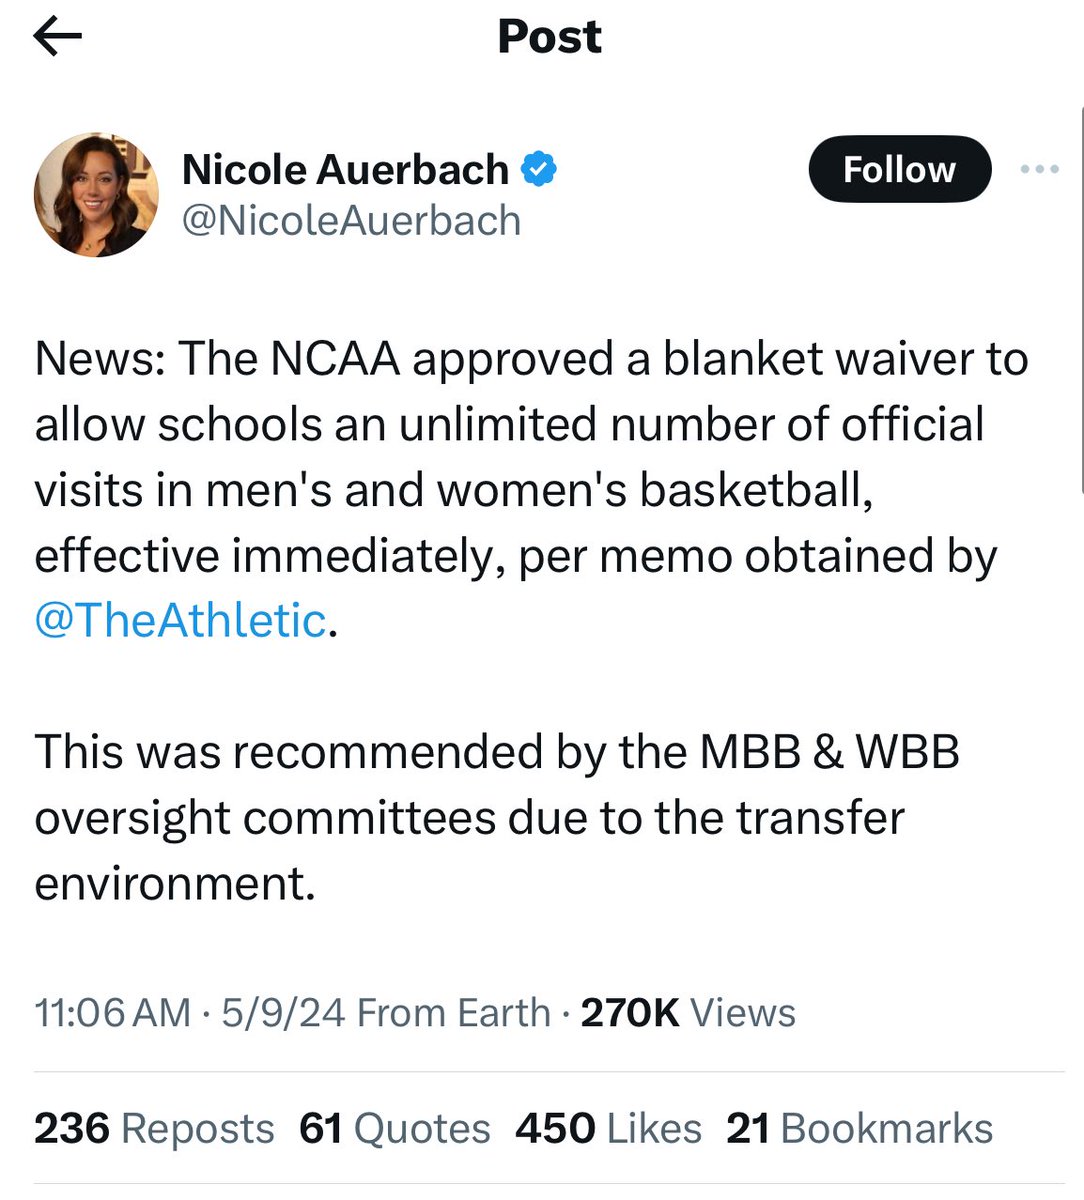 The NCAA has approved a blanket waiver, allowing unlimited official visits (H/T Nicole Auerbach). 🤯 Effective through July 31, 2025. Let the official visit games begin. ⏳